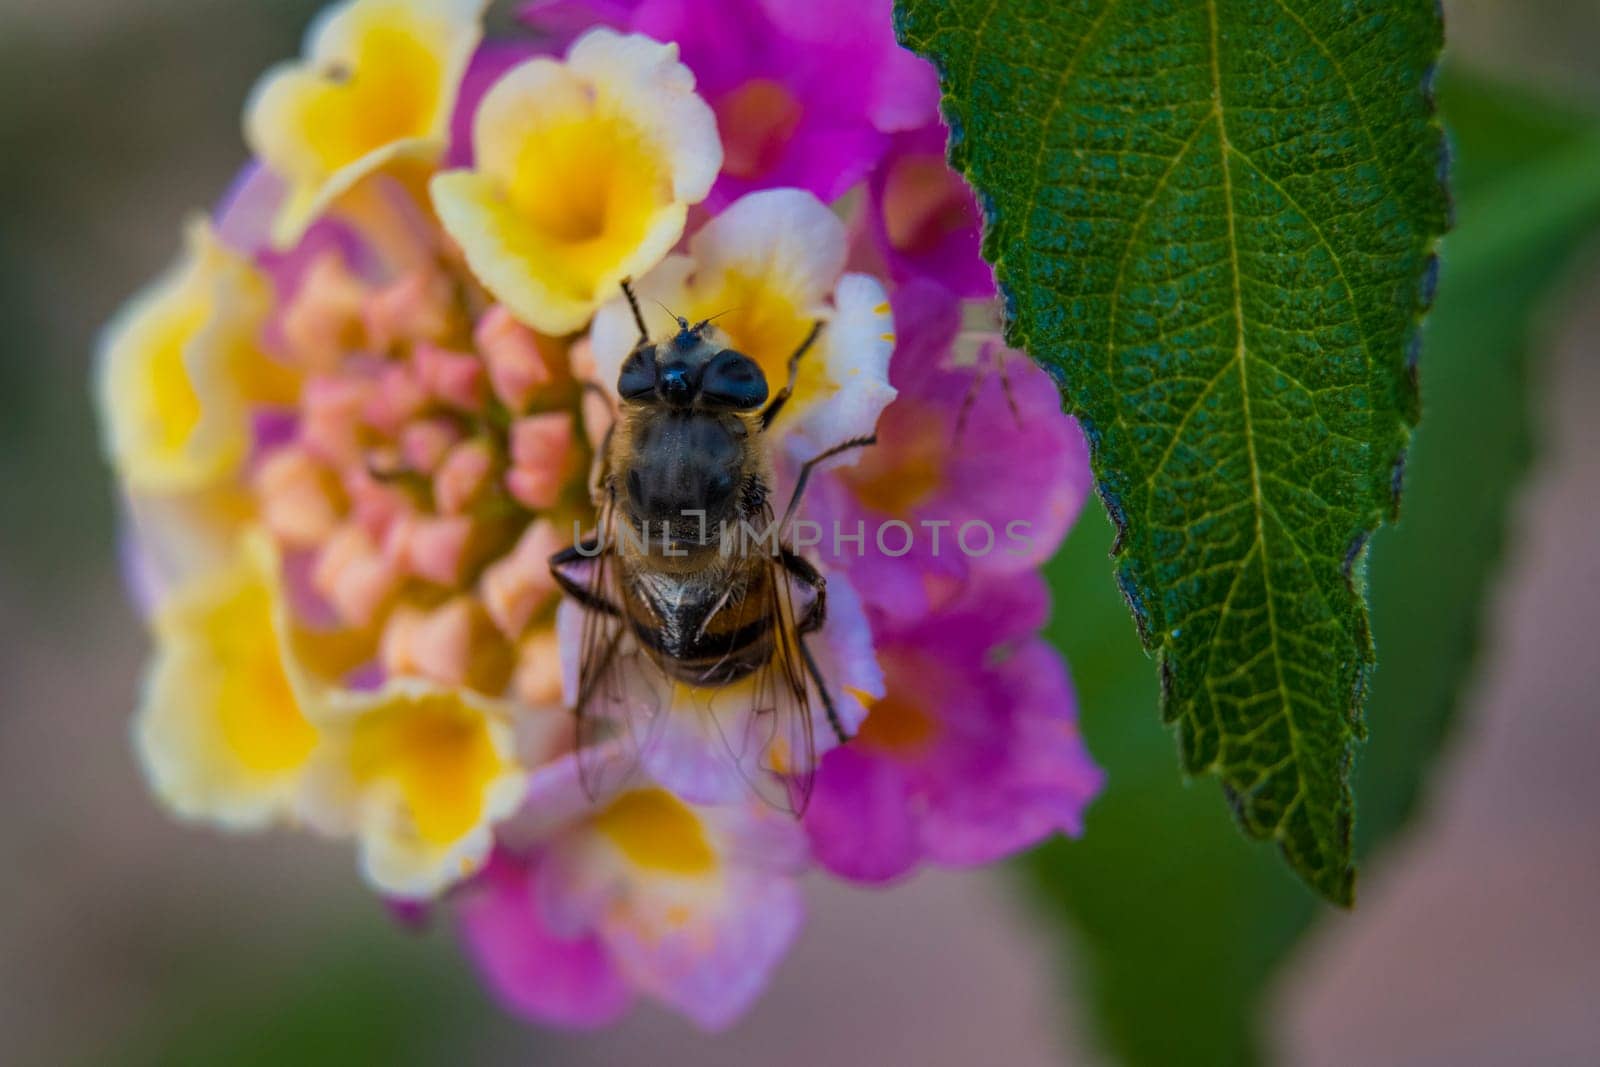 Bee eating nectar on a vivid and colorful close-up of a lantana camara ornamental flower in the garden.